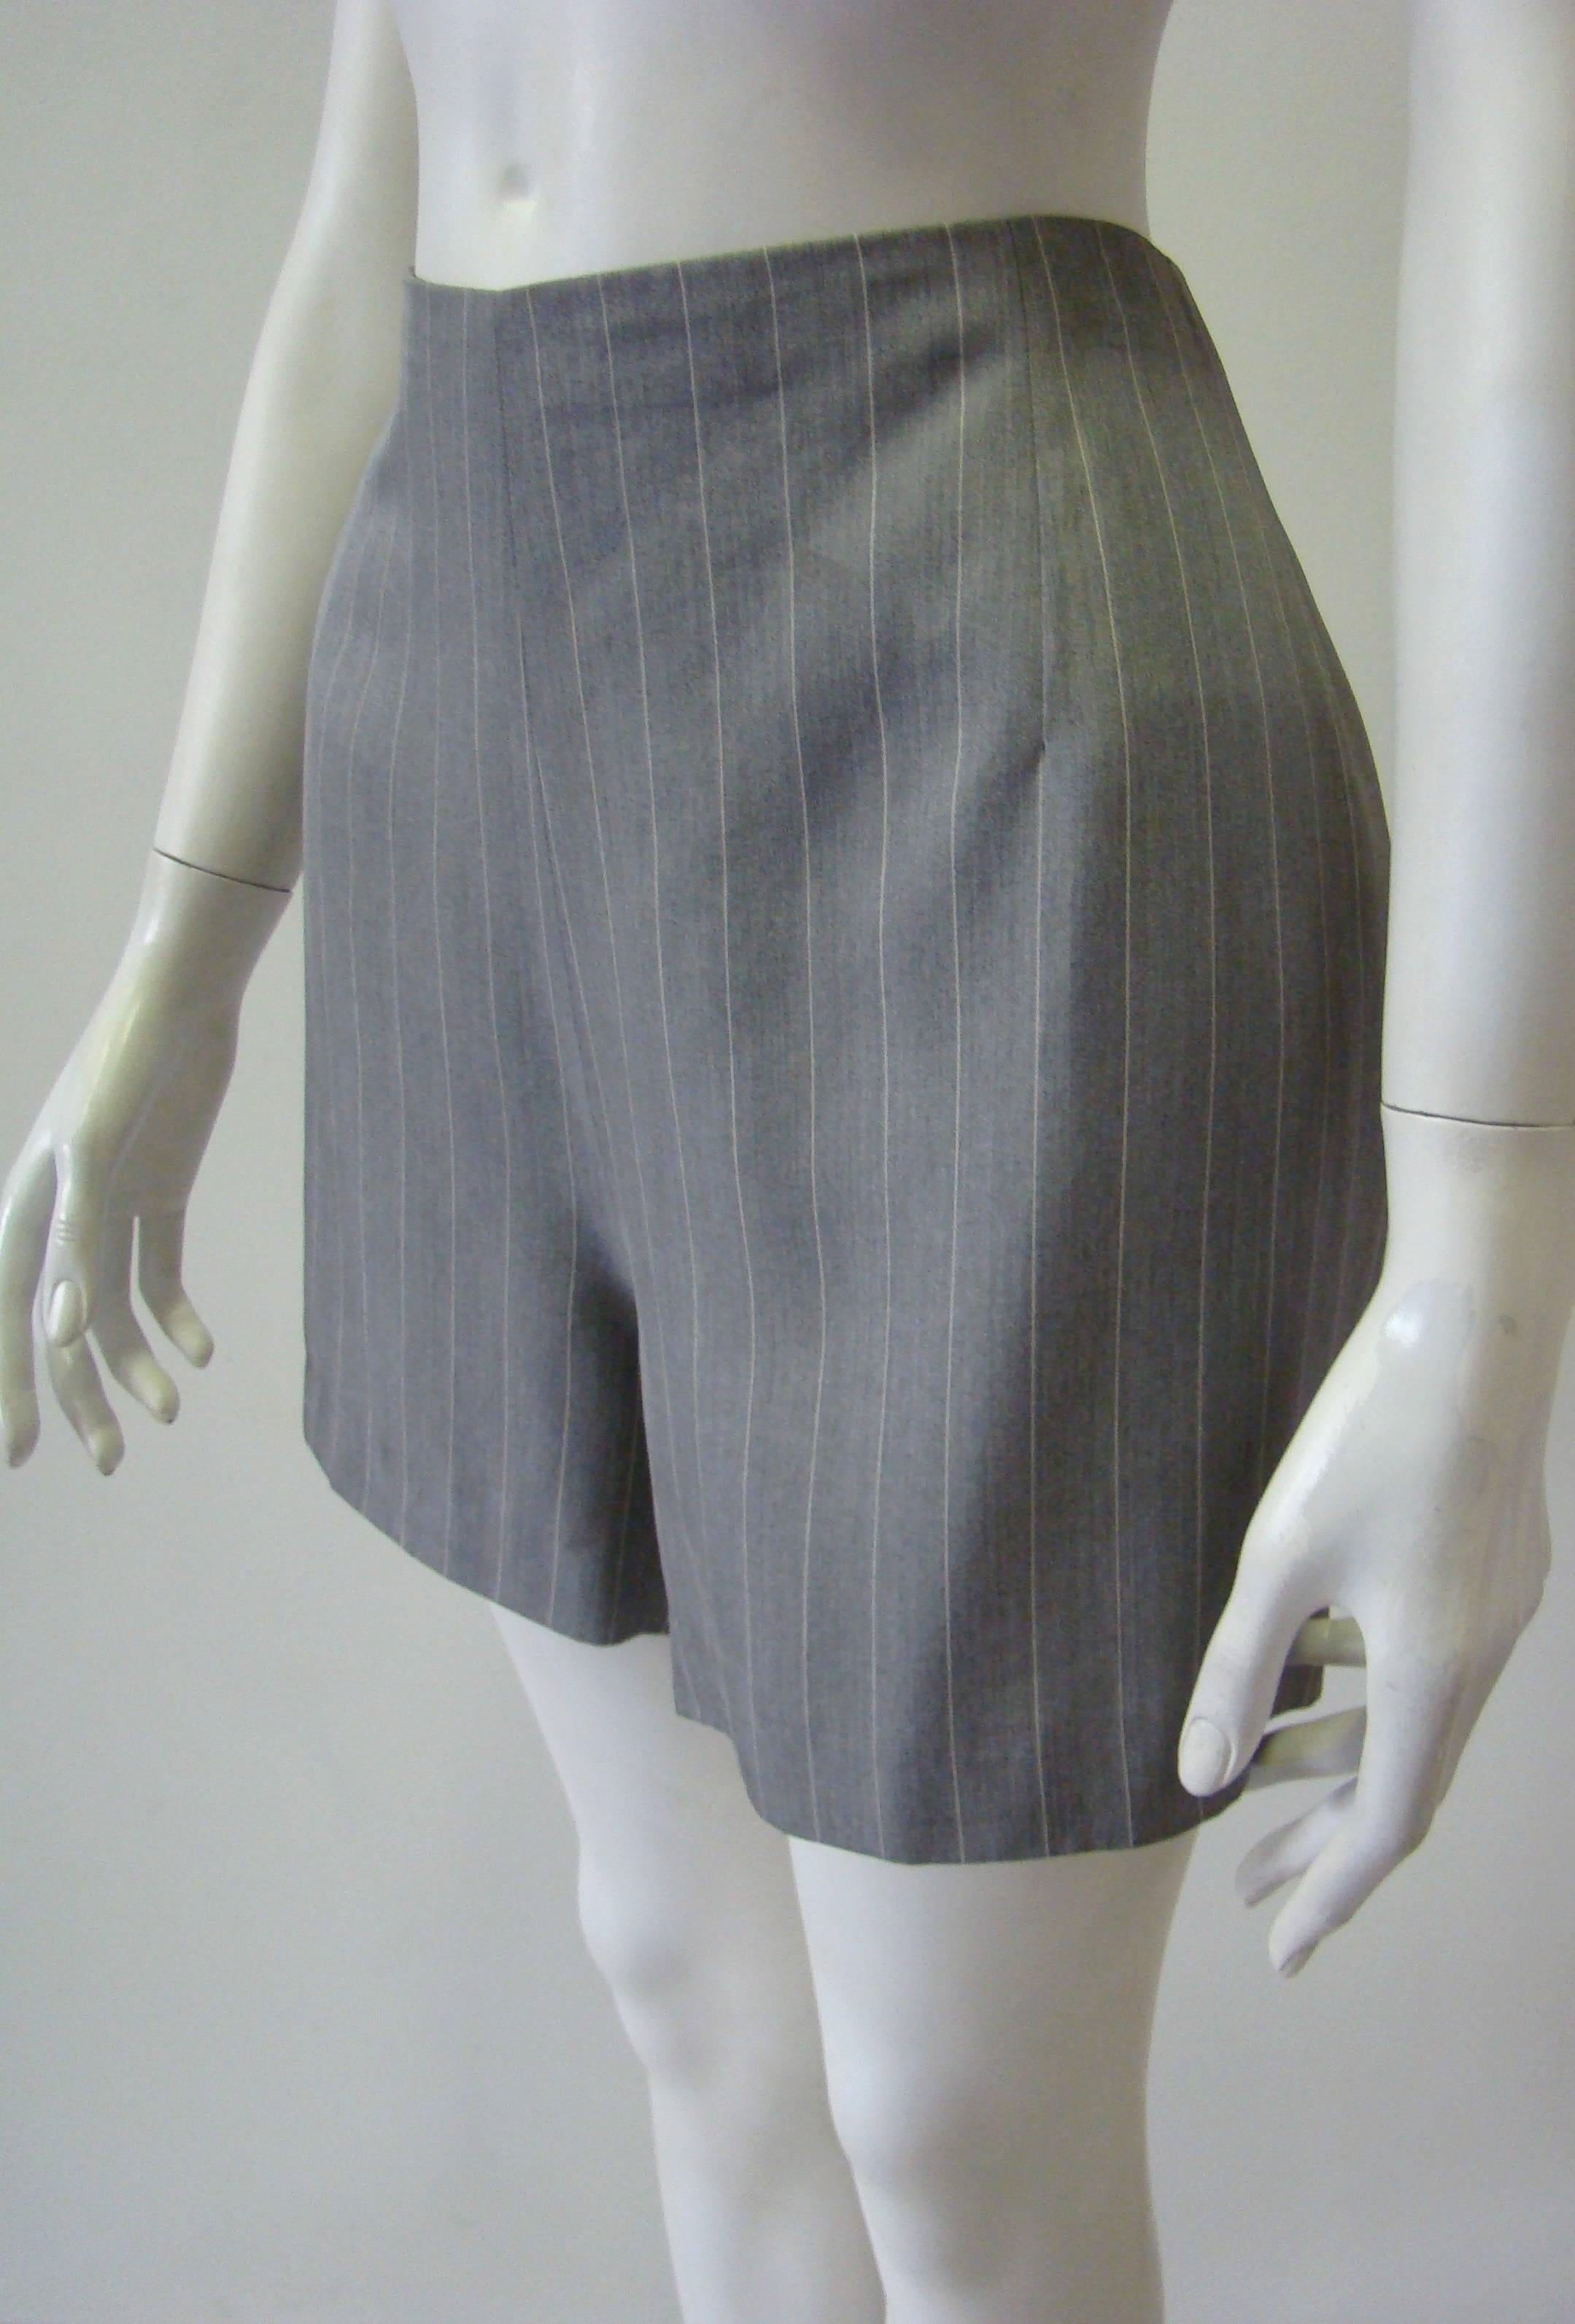 Gianni Versace Couture Striped Silk Shorts Fall 1995 In Excellent Condition For Sale In Athens, Agia Paraskevi